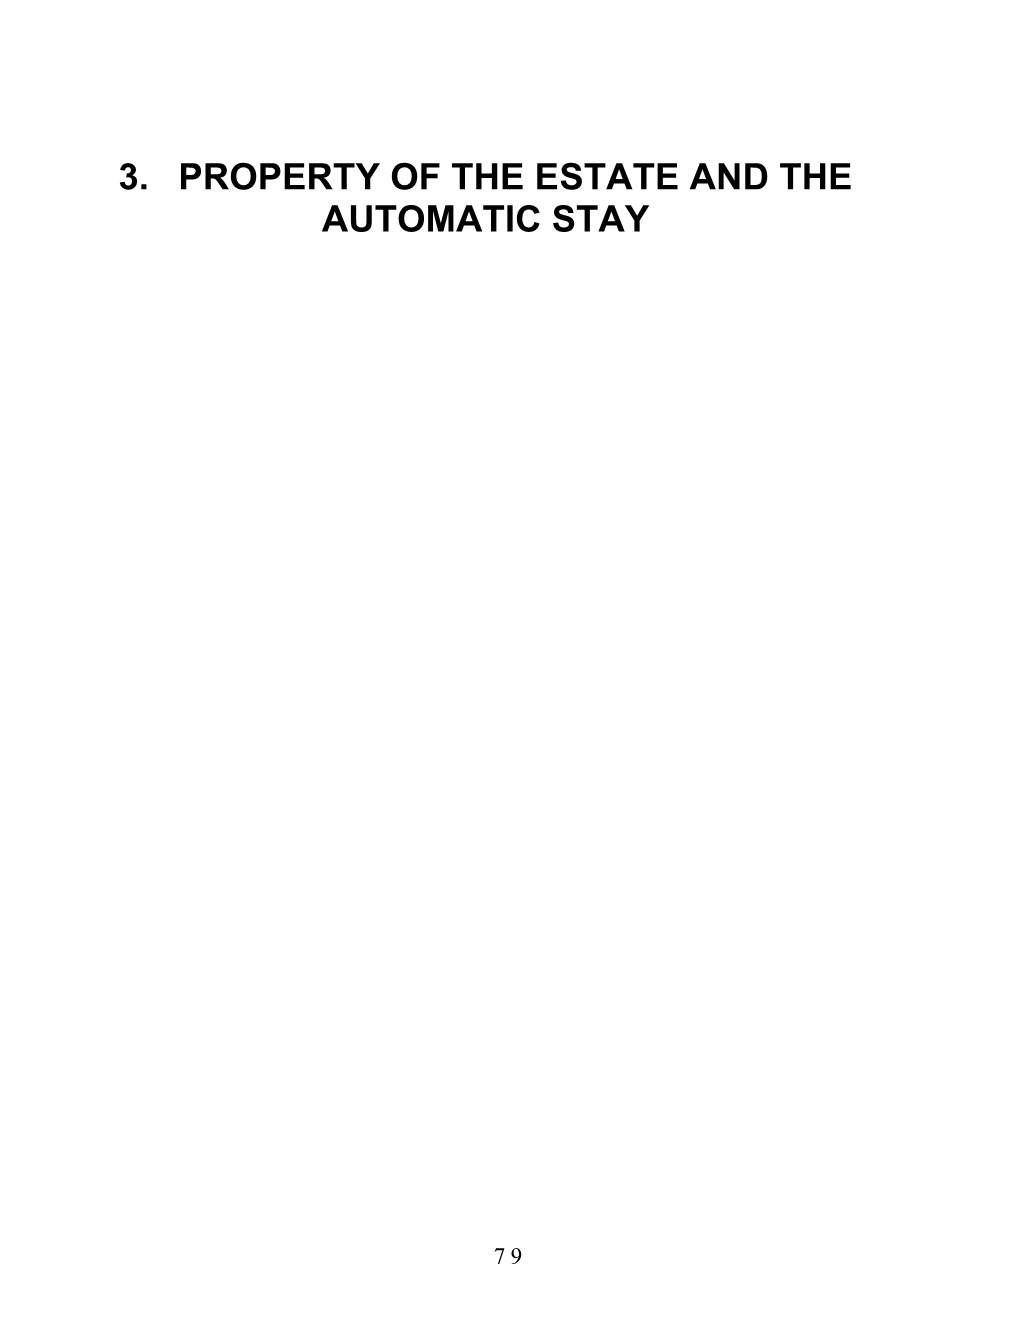 3. Property of the Estate and the Automatic Stay